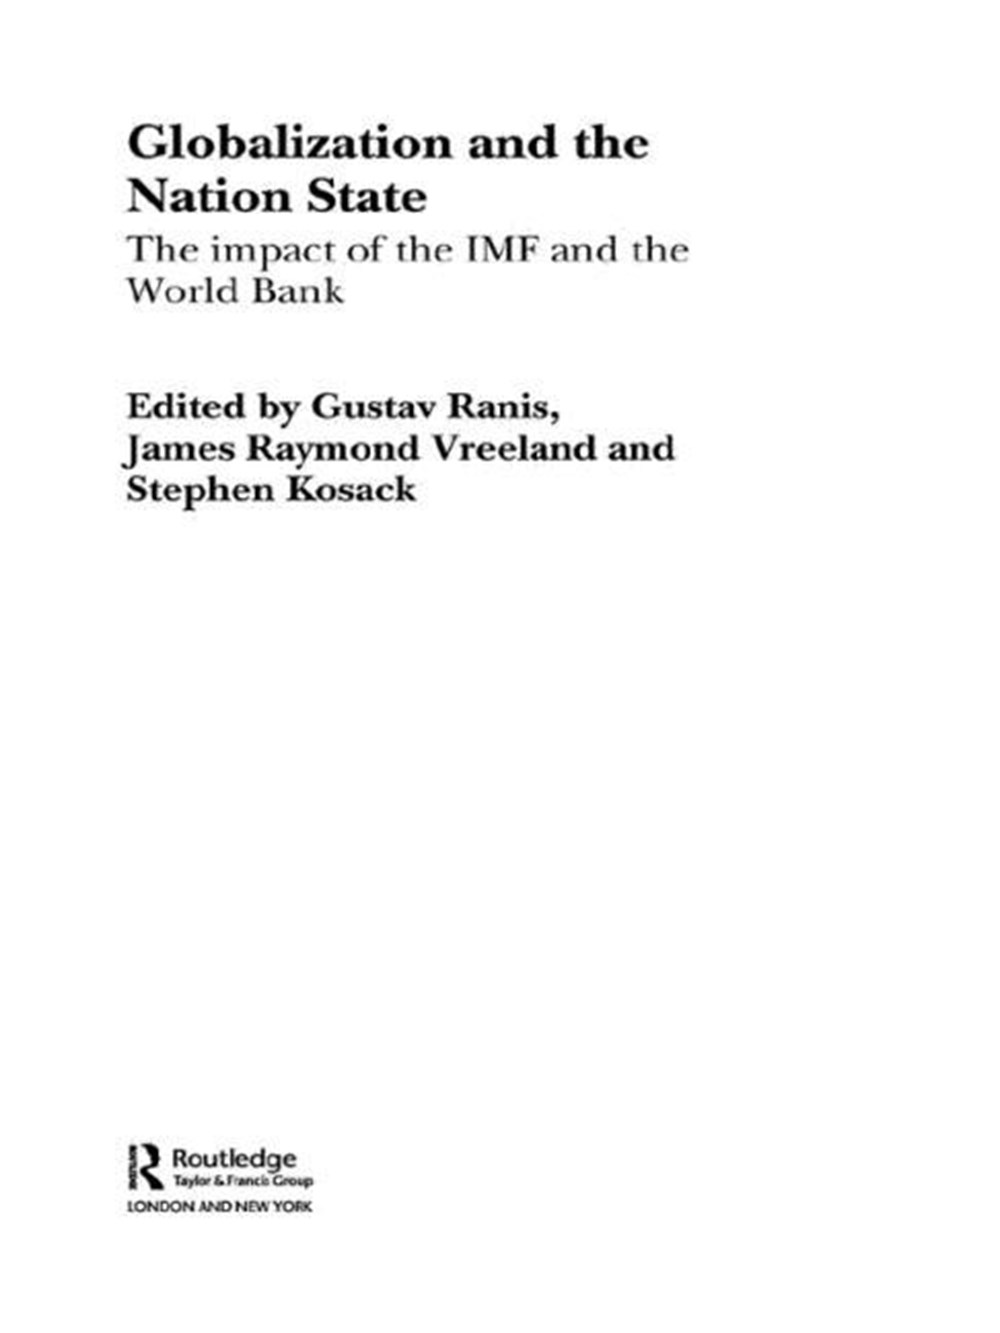 Globalization and the Nation State: The Impact of the IMF and the World Bank (Revised)